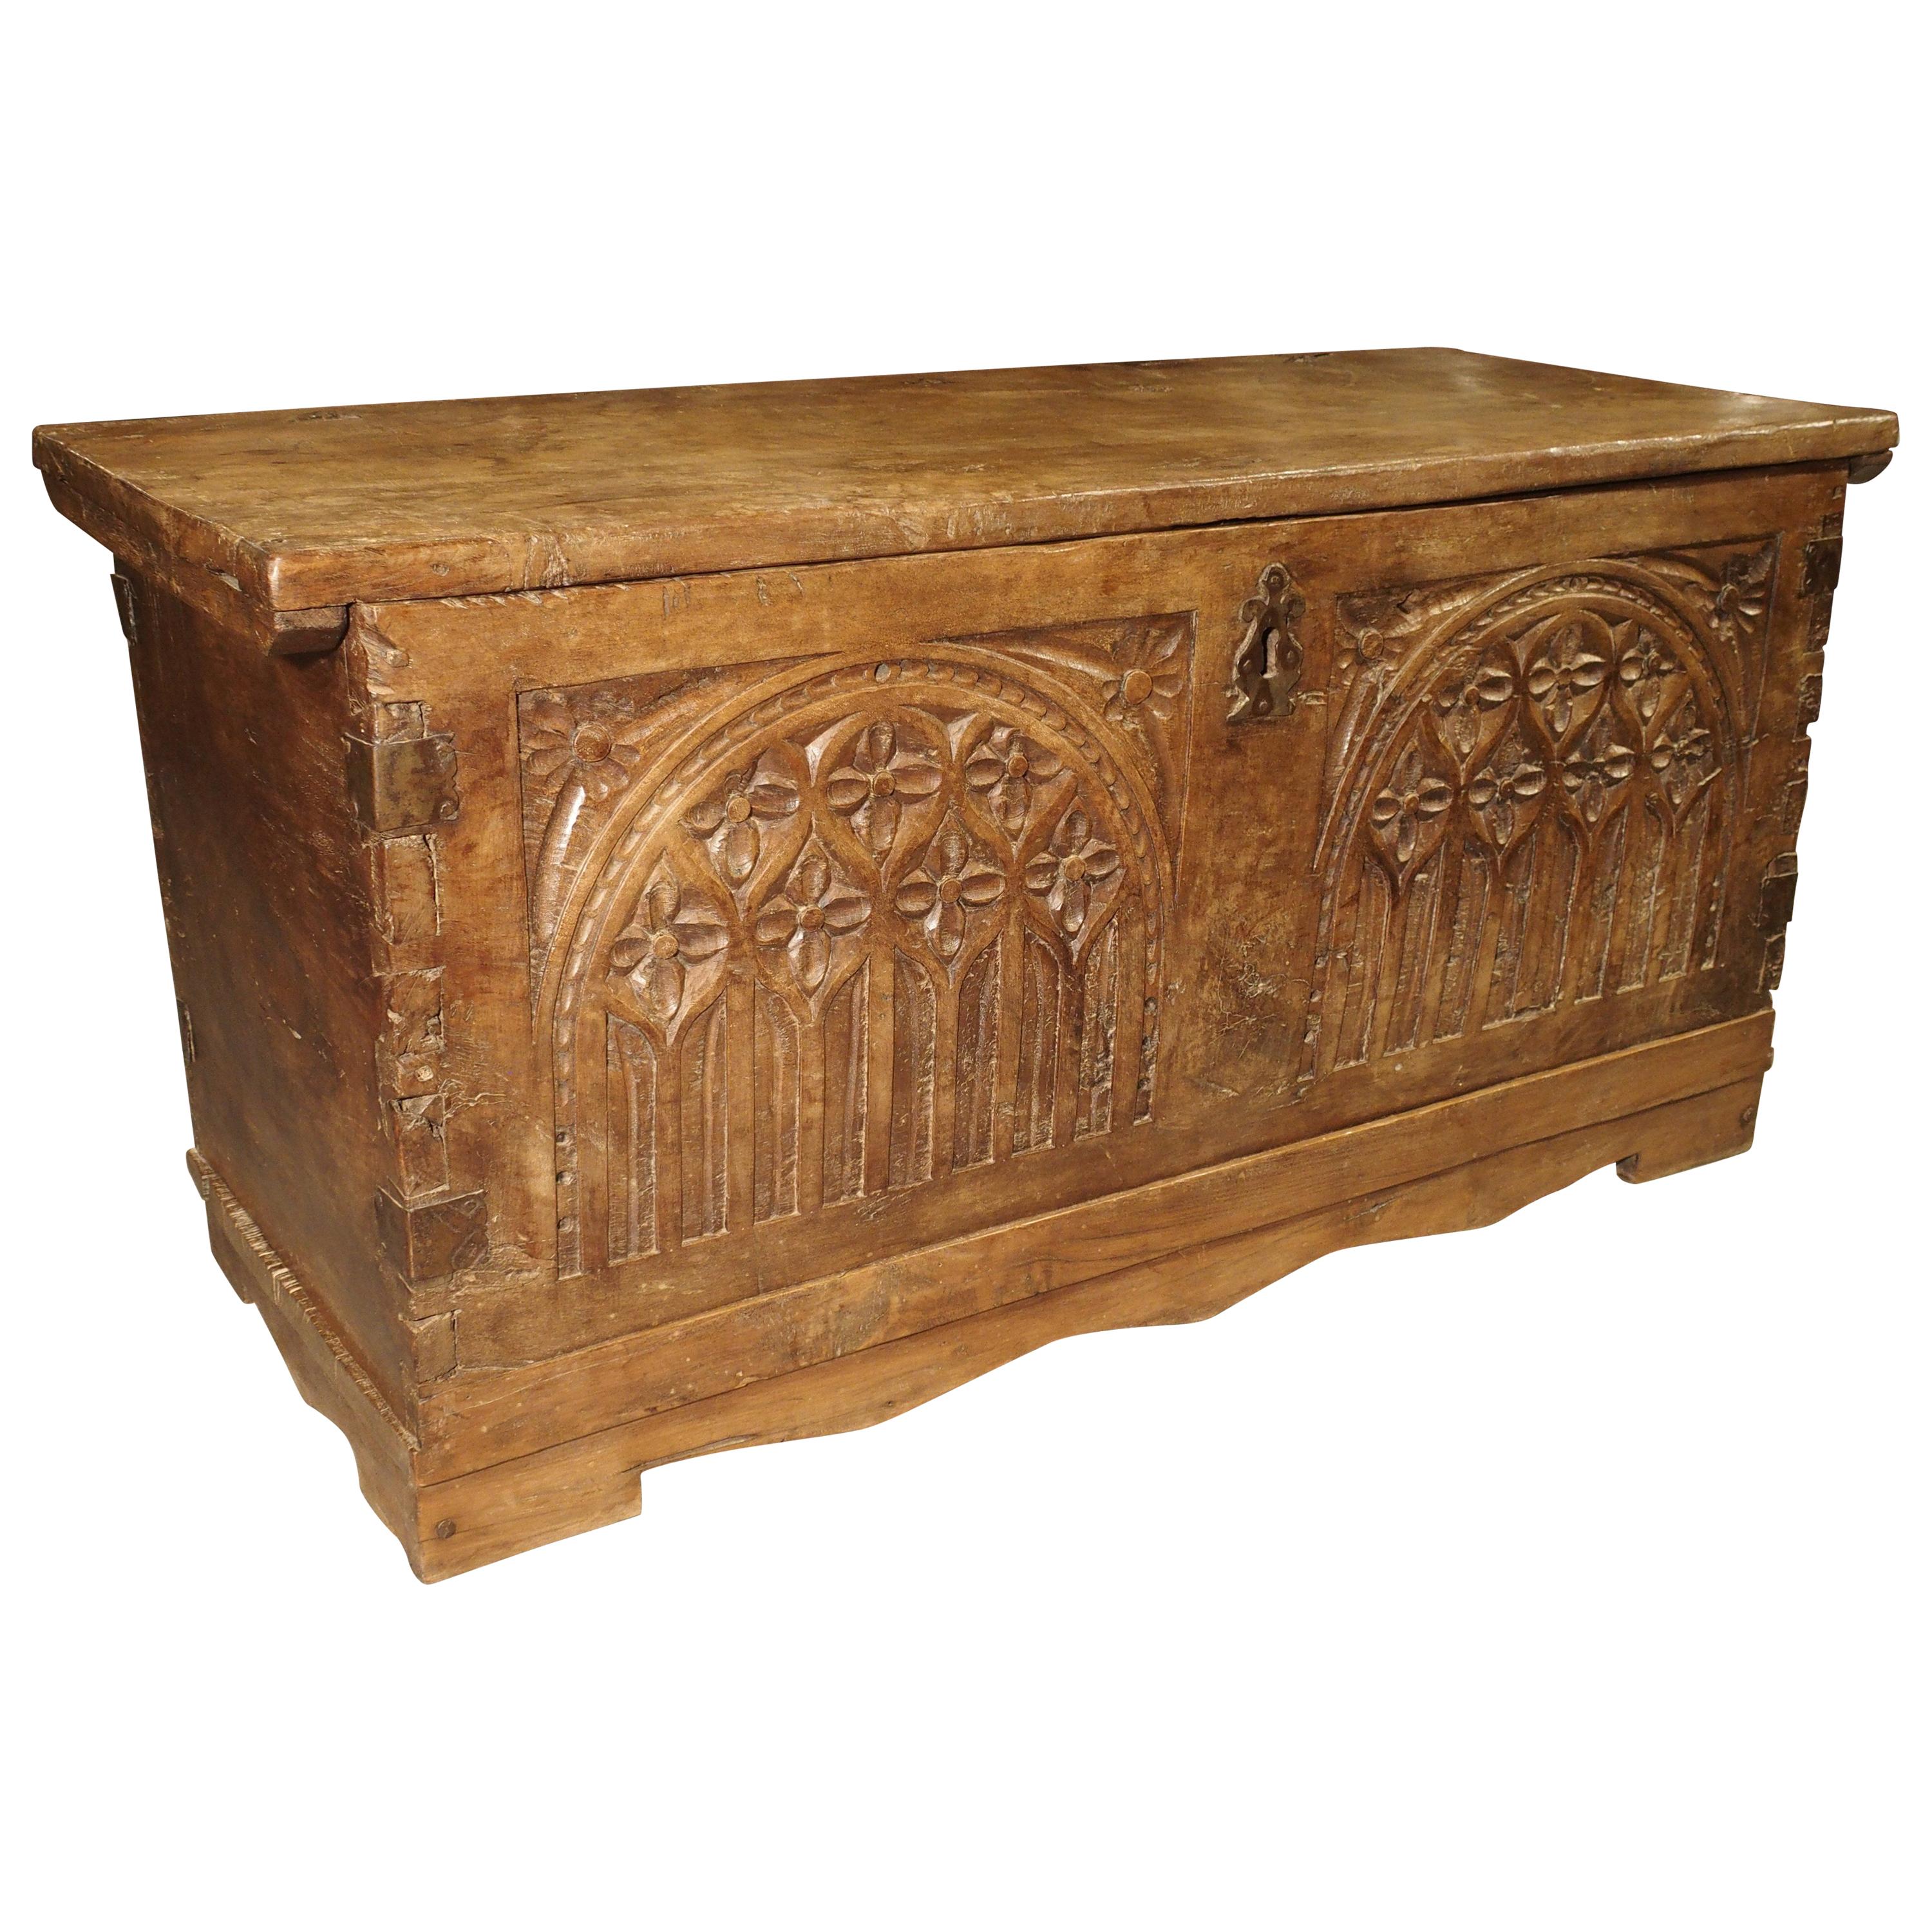 Early 18th Century Walnut Wood Trunk from France